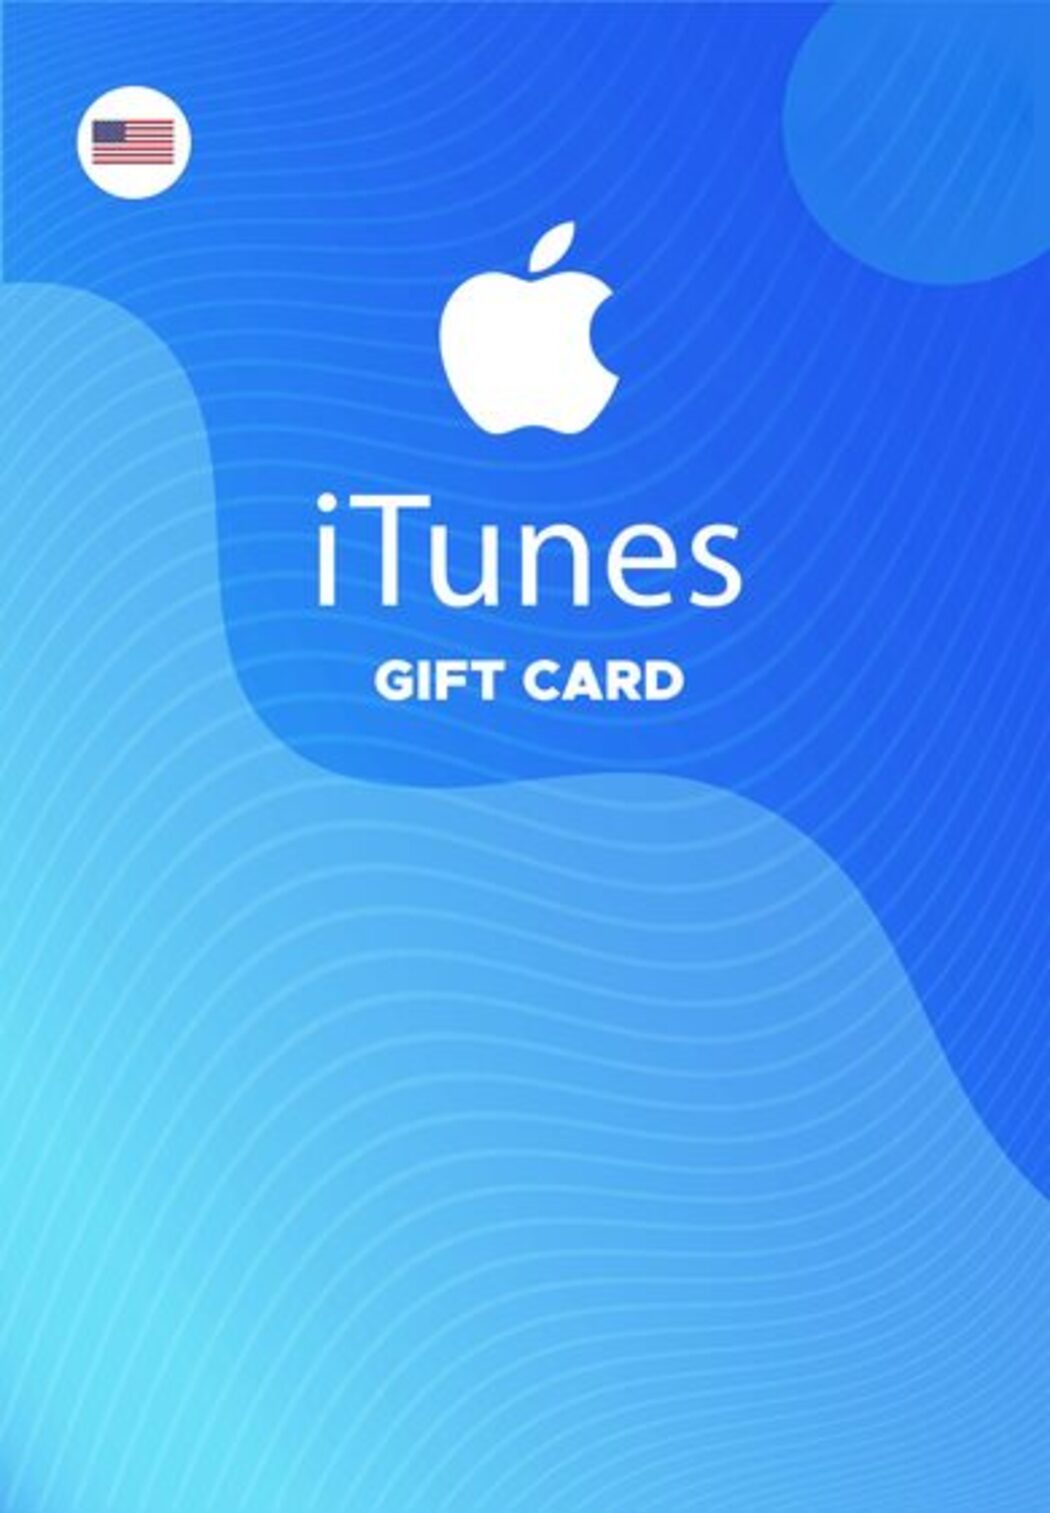 Apple & iTunes Giftcard 10 crédits (US Store)